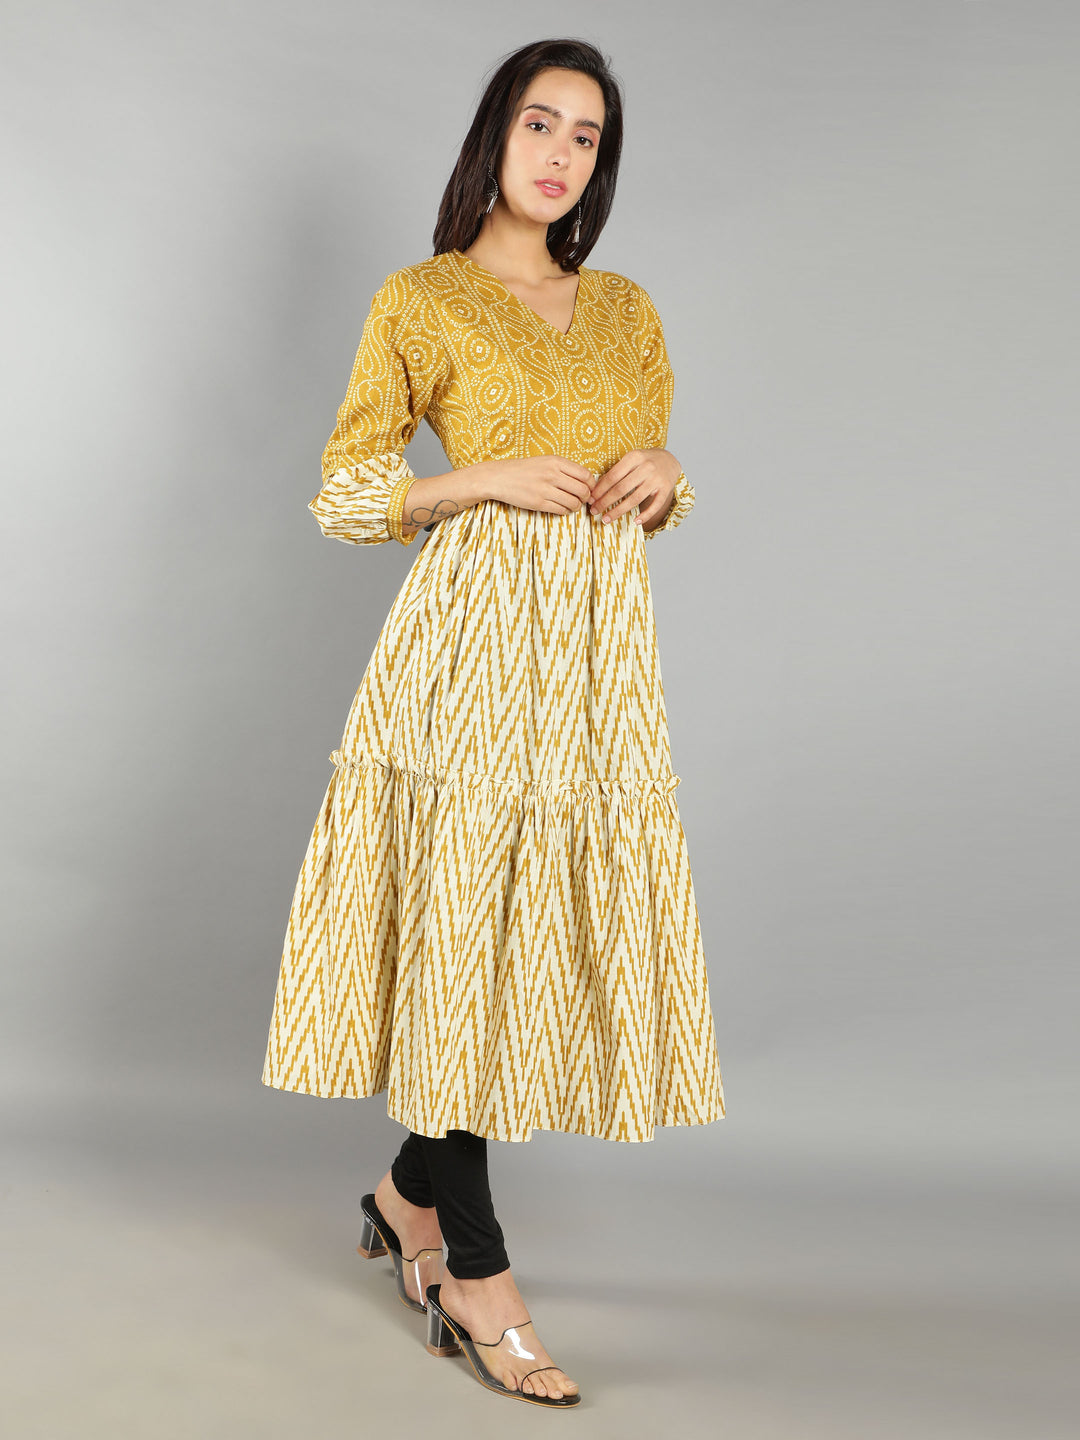 See Designs Mustard Fit and Flare Women Dress